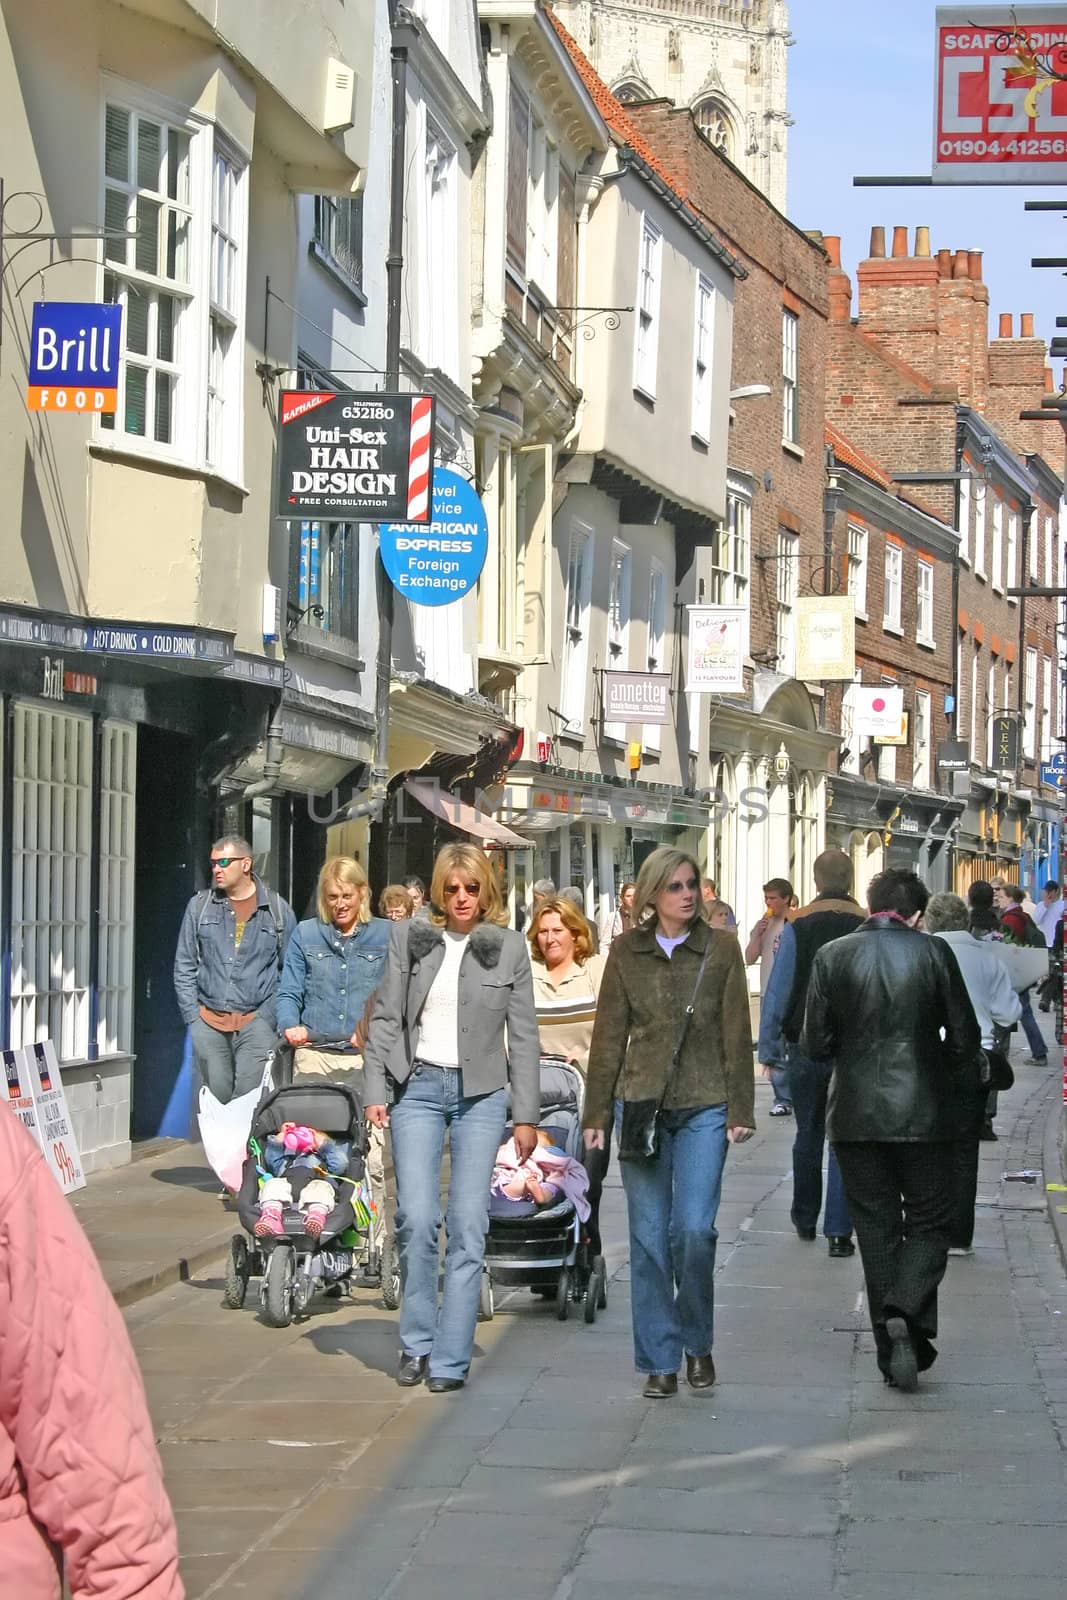 Shoppers and Tourists in York England by green308